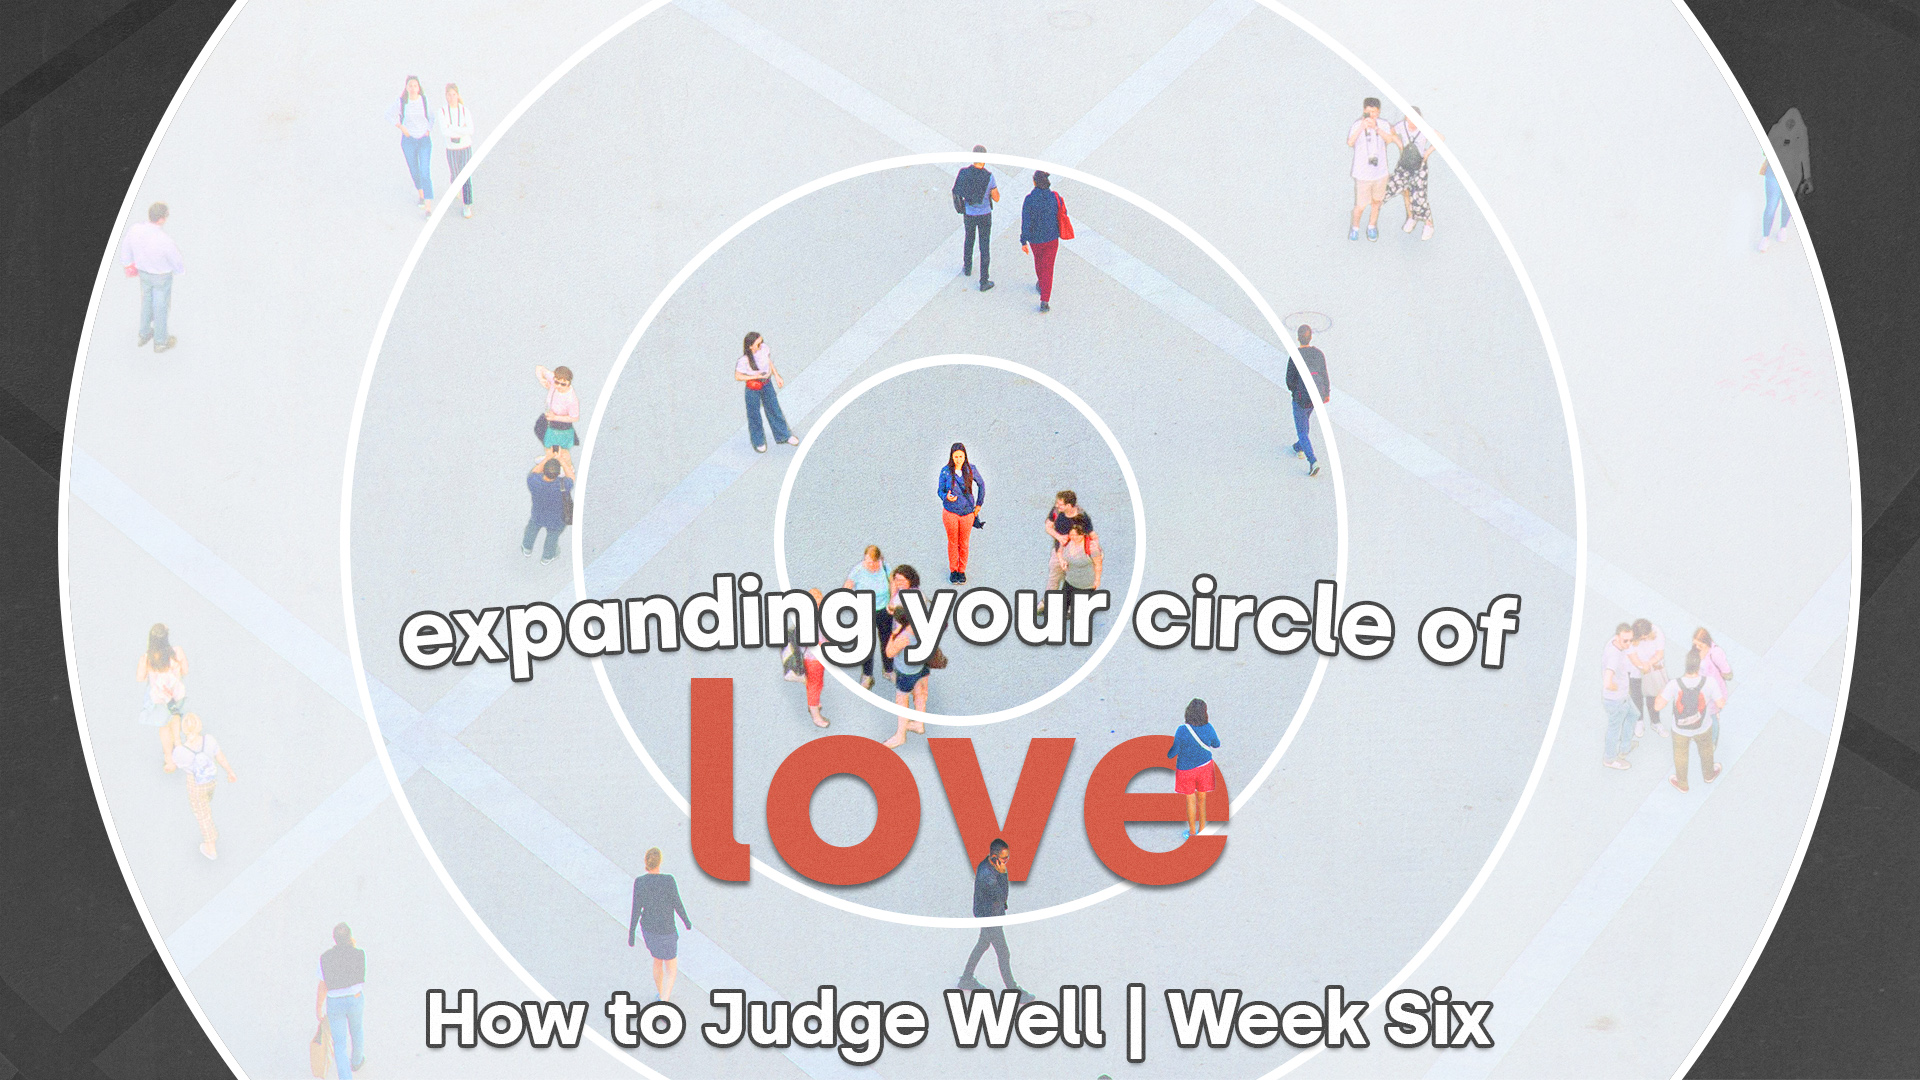 How to Judge Well - Week Six